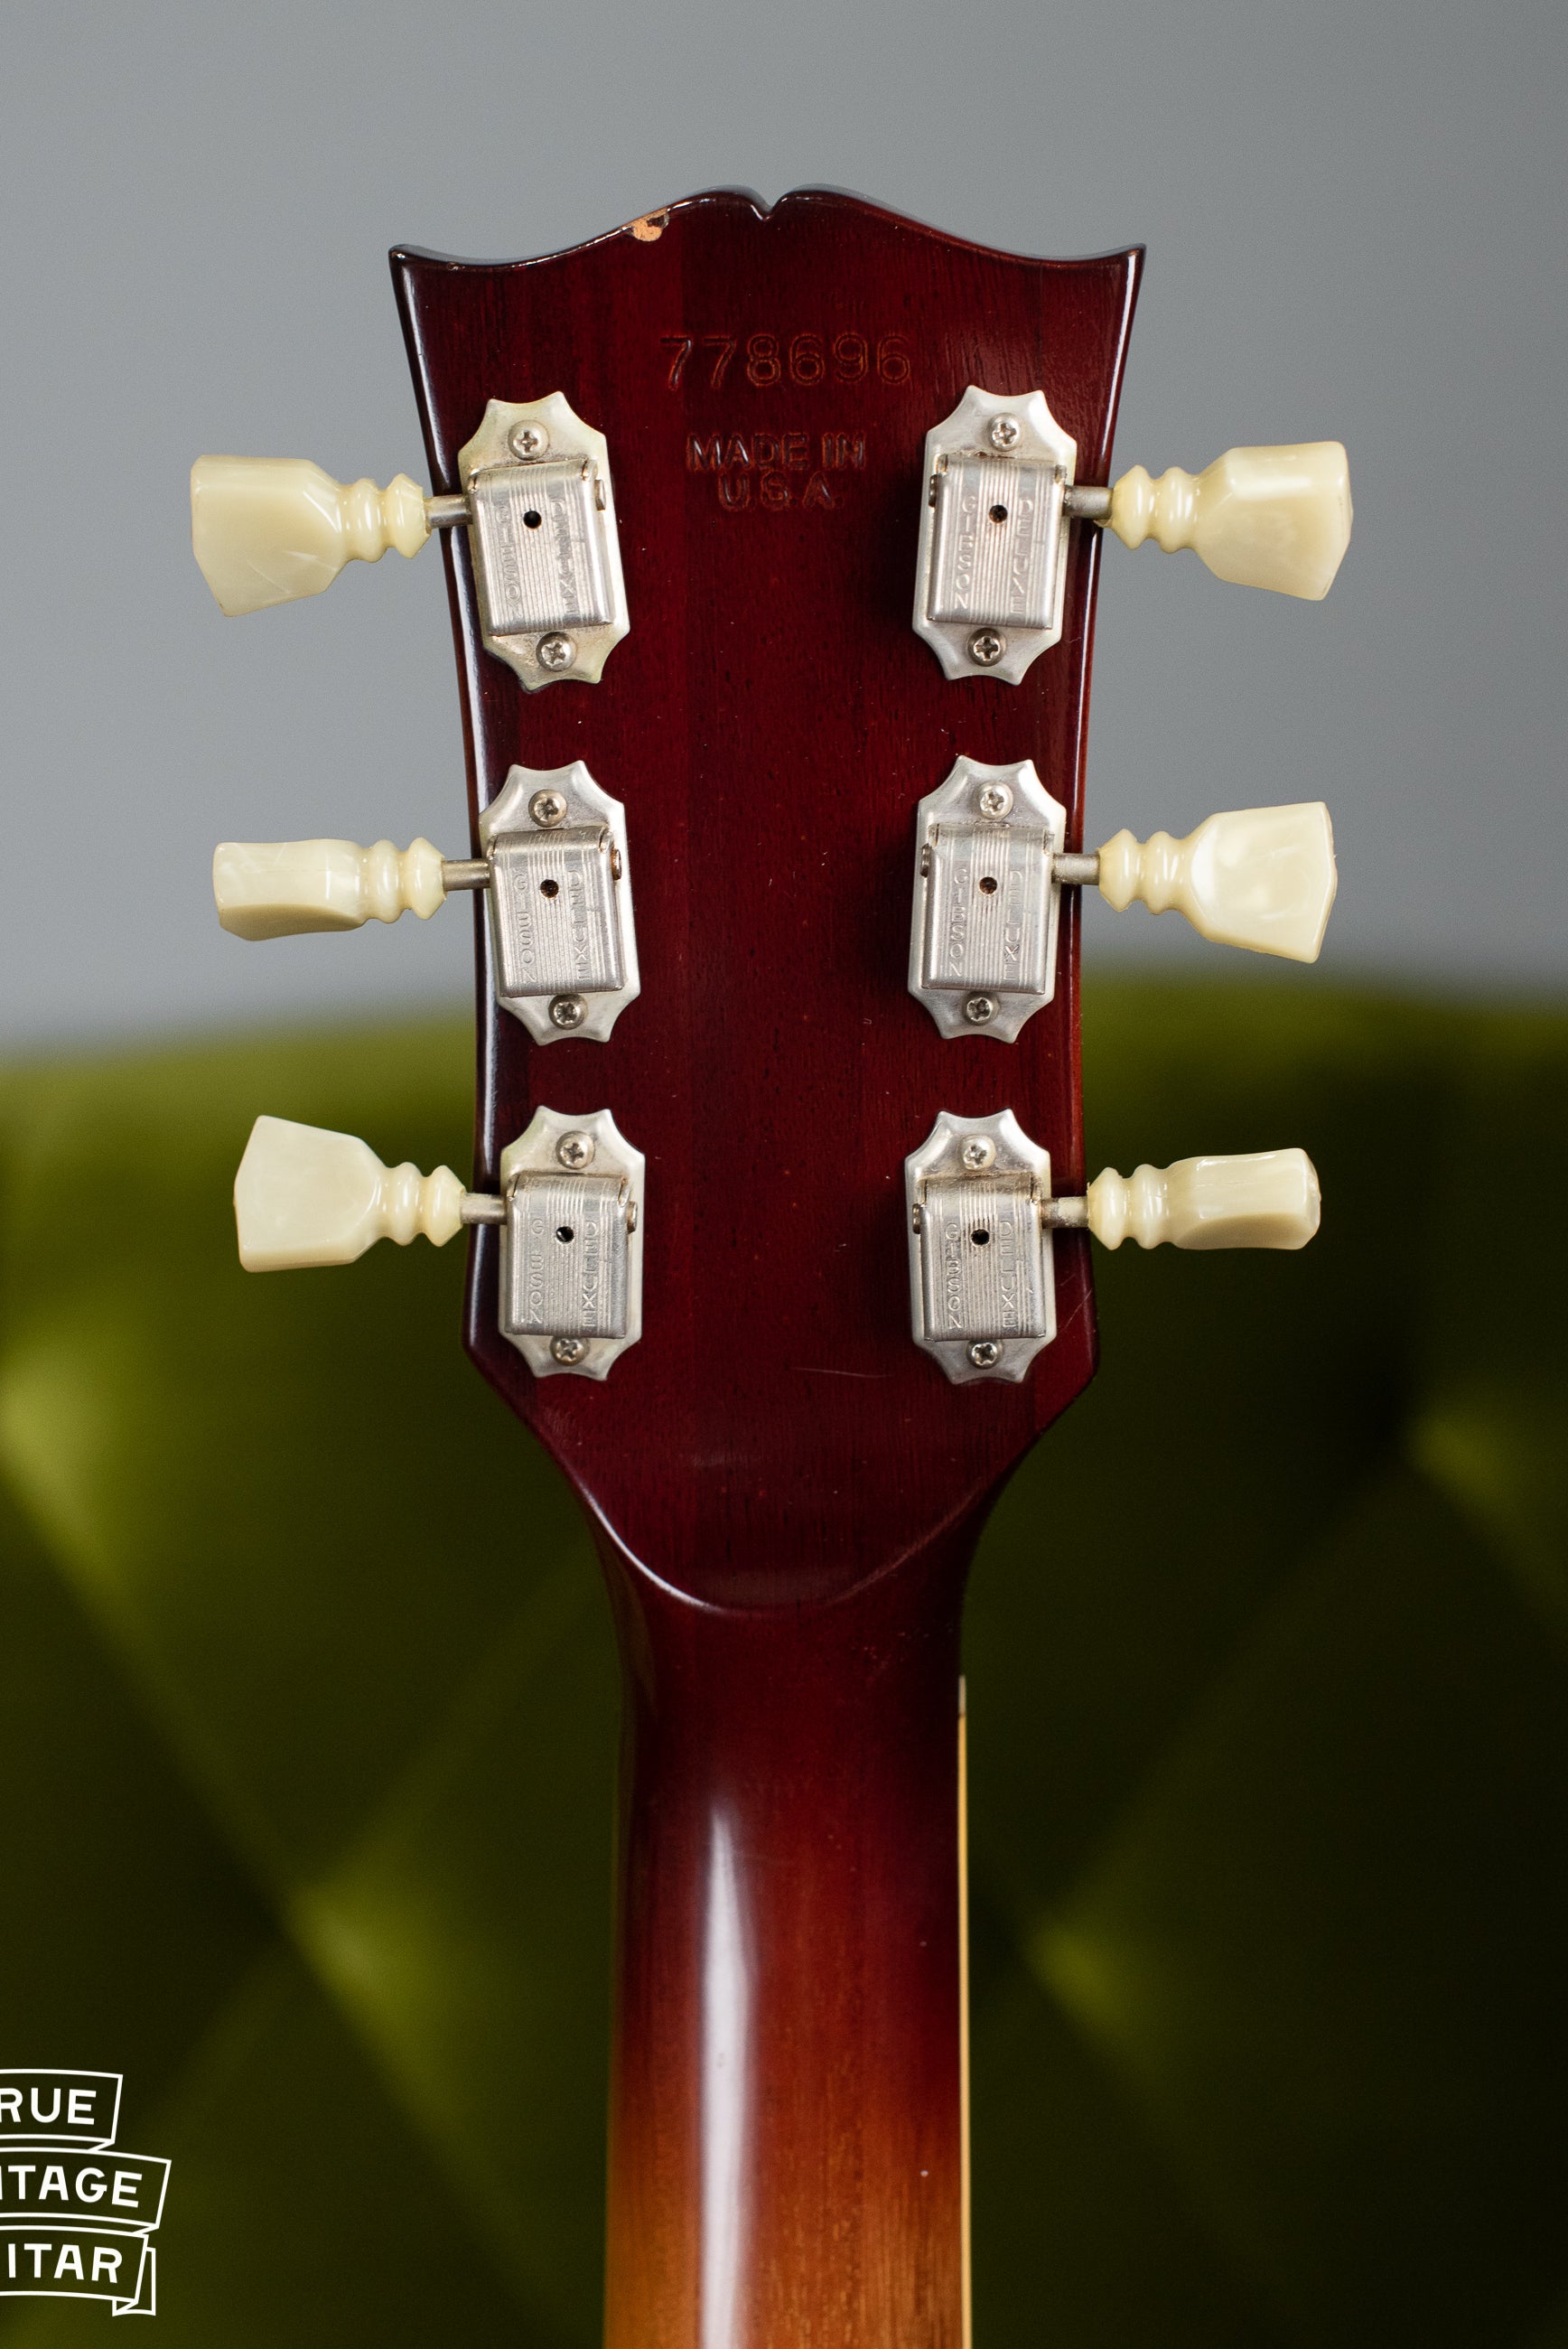 Double line Kluson opal button tuners, back of neck, Vintage 1972 Gibson Les Paul Deluxe electric guitar